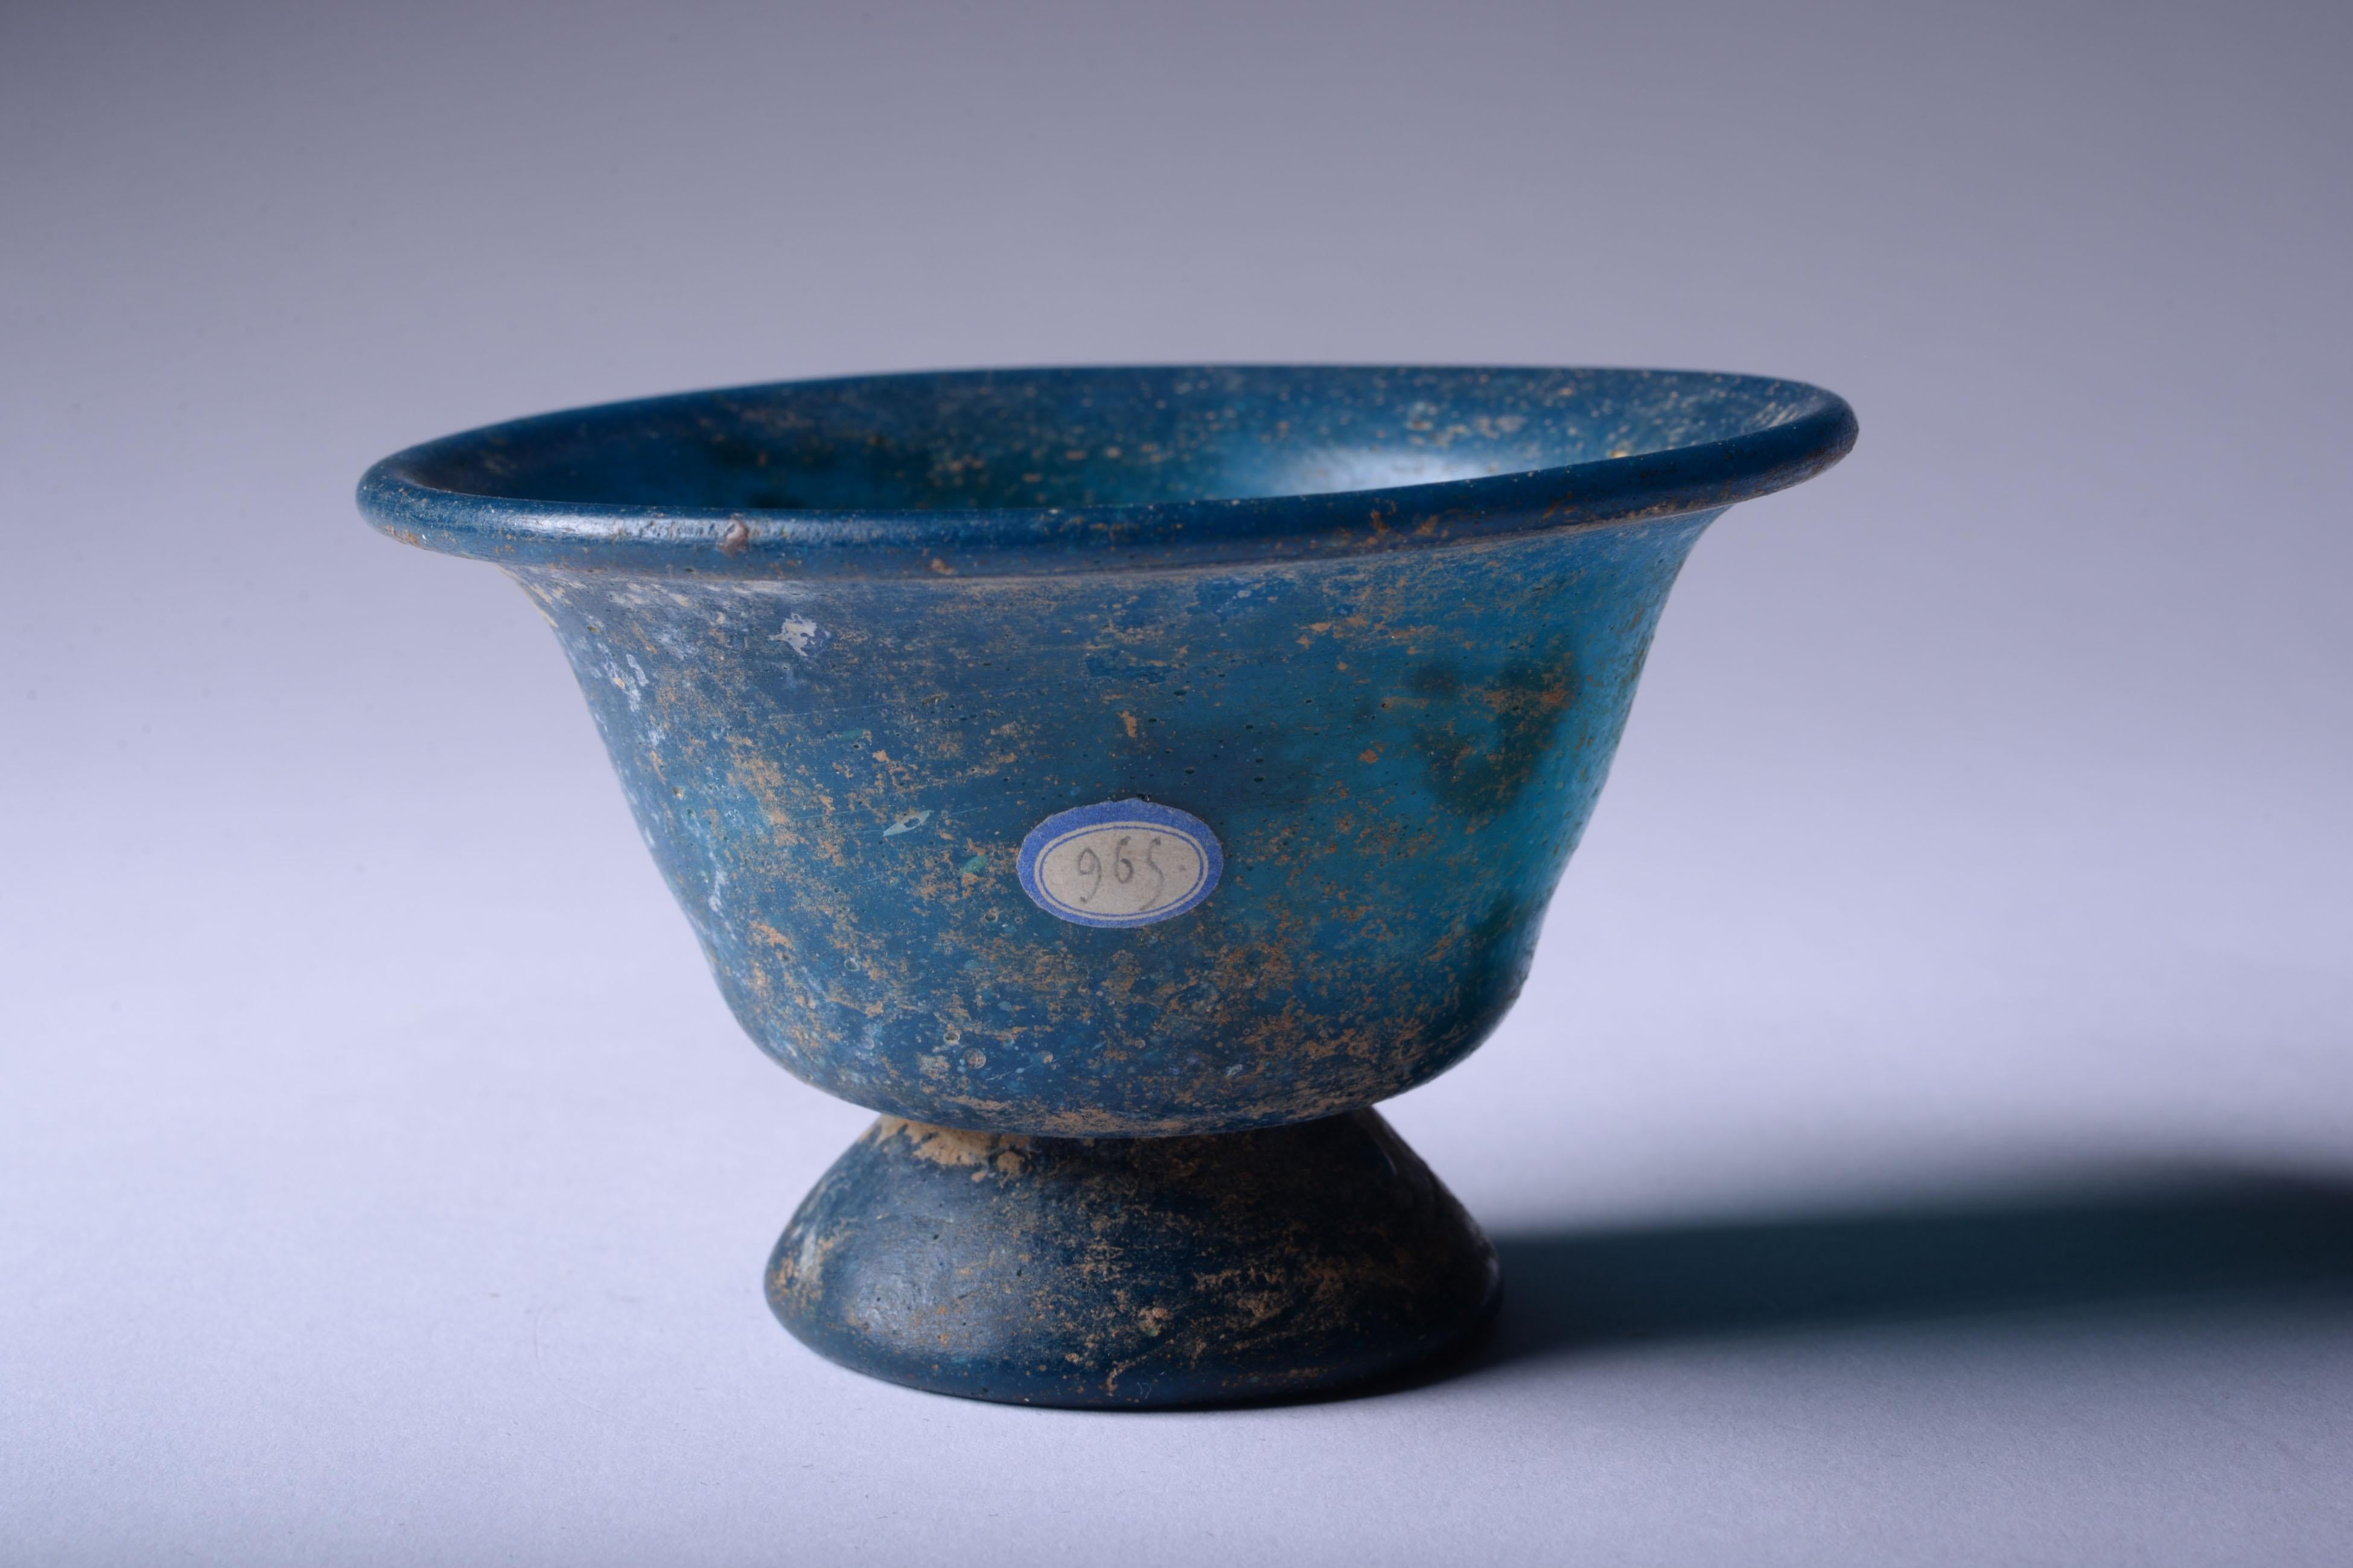 Turquoise glass cup 
Roman Empire, circa 3rd-4th century A.D. 
With old label reading ‘’965’’.

“Pliny relates that the art of glass-making [.] was actually discovered under the reign of Tiberius, and that the shop and tools of the artist were